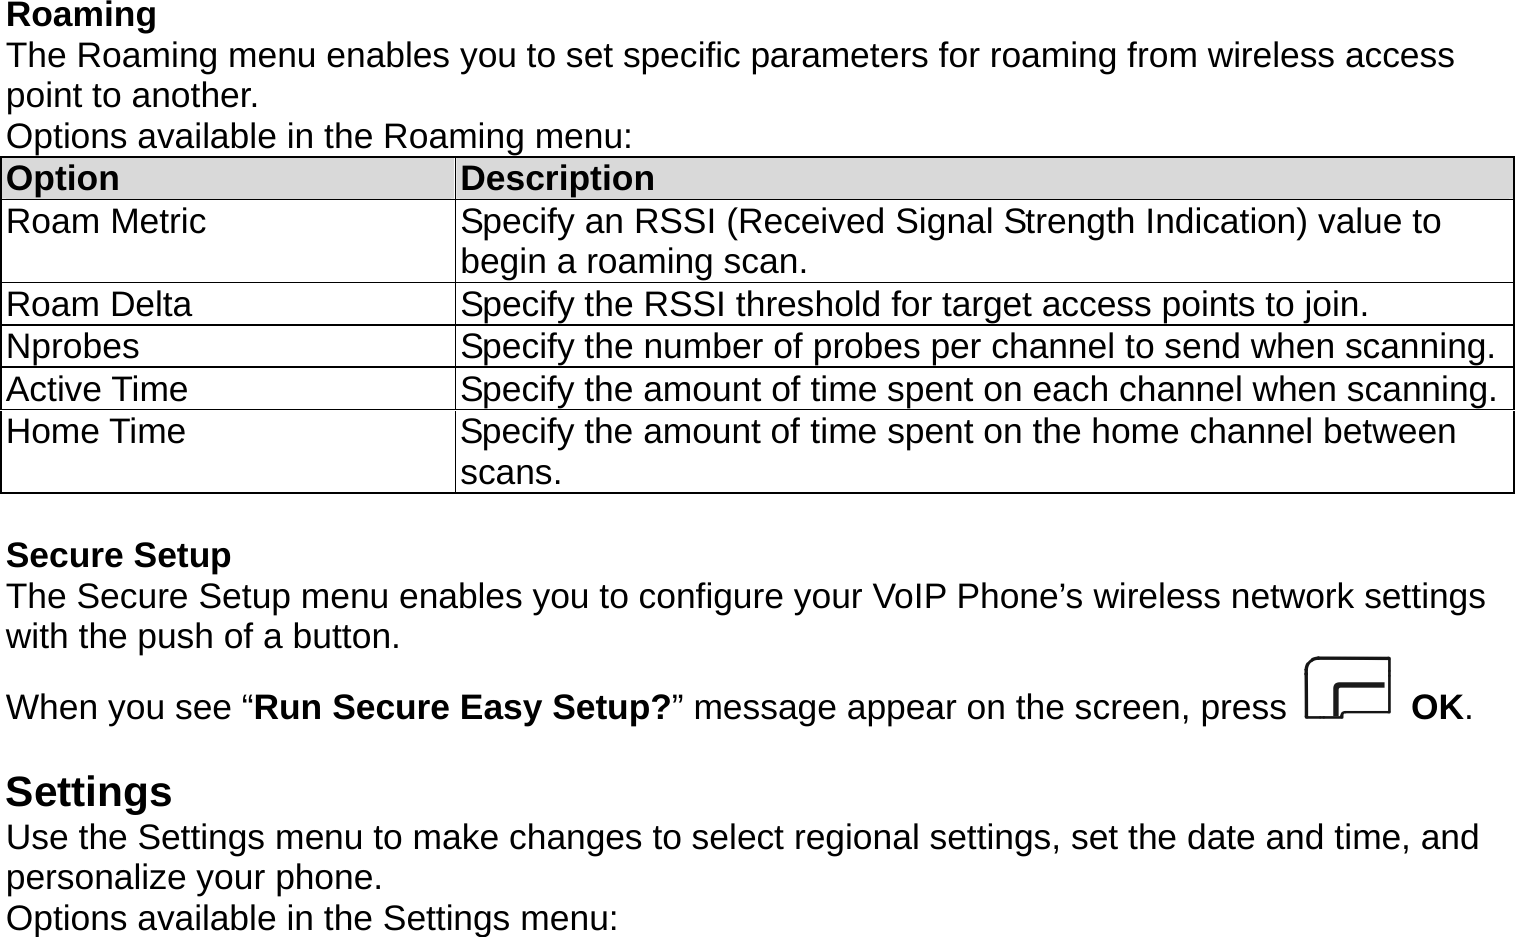  Roaming The Roaming menu enables you to set specific parameters for roaming from wireless access point to another.   Options available in the Roaming menu: Option  Description Roam Metric  Specify an RSSI (Received Signal Strength Indication) value to begin a roaming scan. Roam Delta  Specify the RSSI threshold for target access points to join. Nprobes  Specify the number of probes per channel to send when scanning.Active Time  Specify the amount of time spent on each channel when scanning.Home Time  Specify the amount of time spent on the home channel between scans.  Secure Setup The Secure Setup menu enables you to configure your VoIP Phone’s wireless network settings with the push of a button.   When you see “Run Secure Easy Setup?” message appear on the screen, press   OK.  Settings Use the Settings menu to make changes to select regional settings, set the date and time, and personalize your phone. Options available in the Settings menu: 